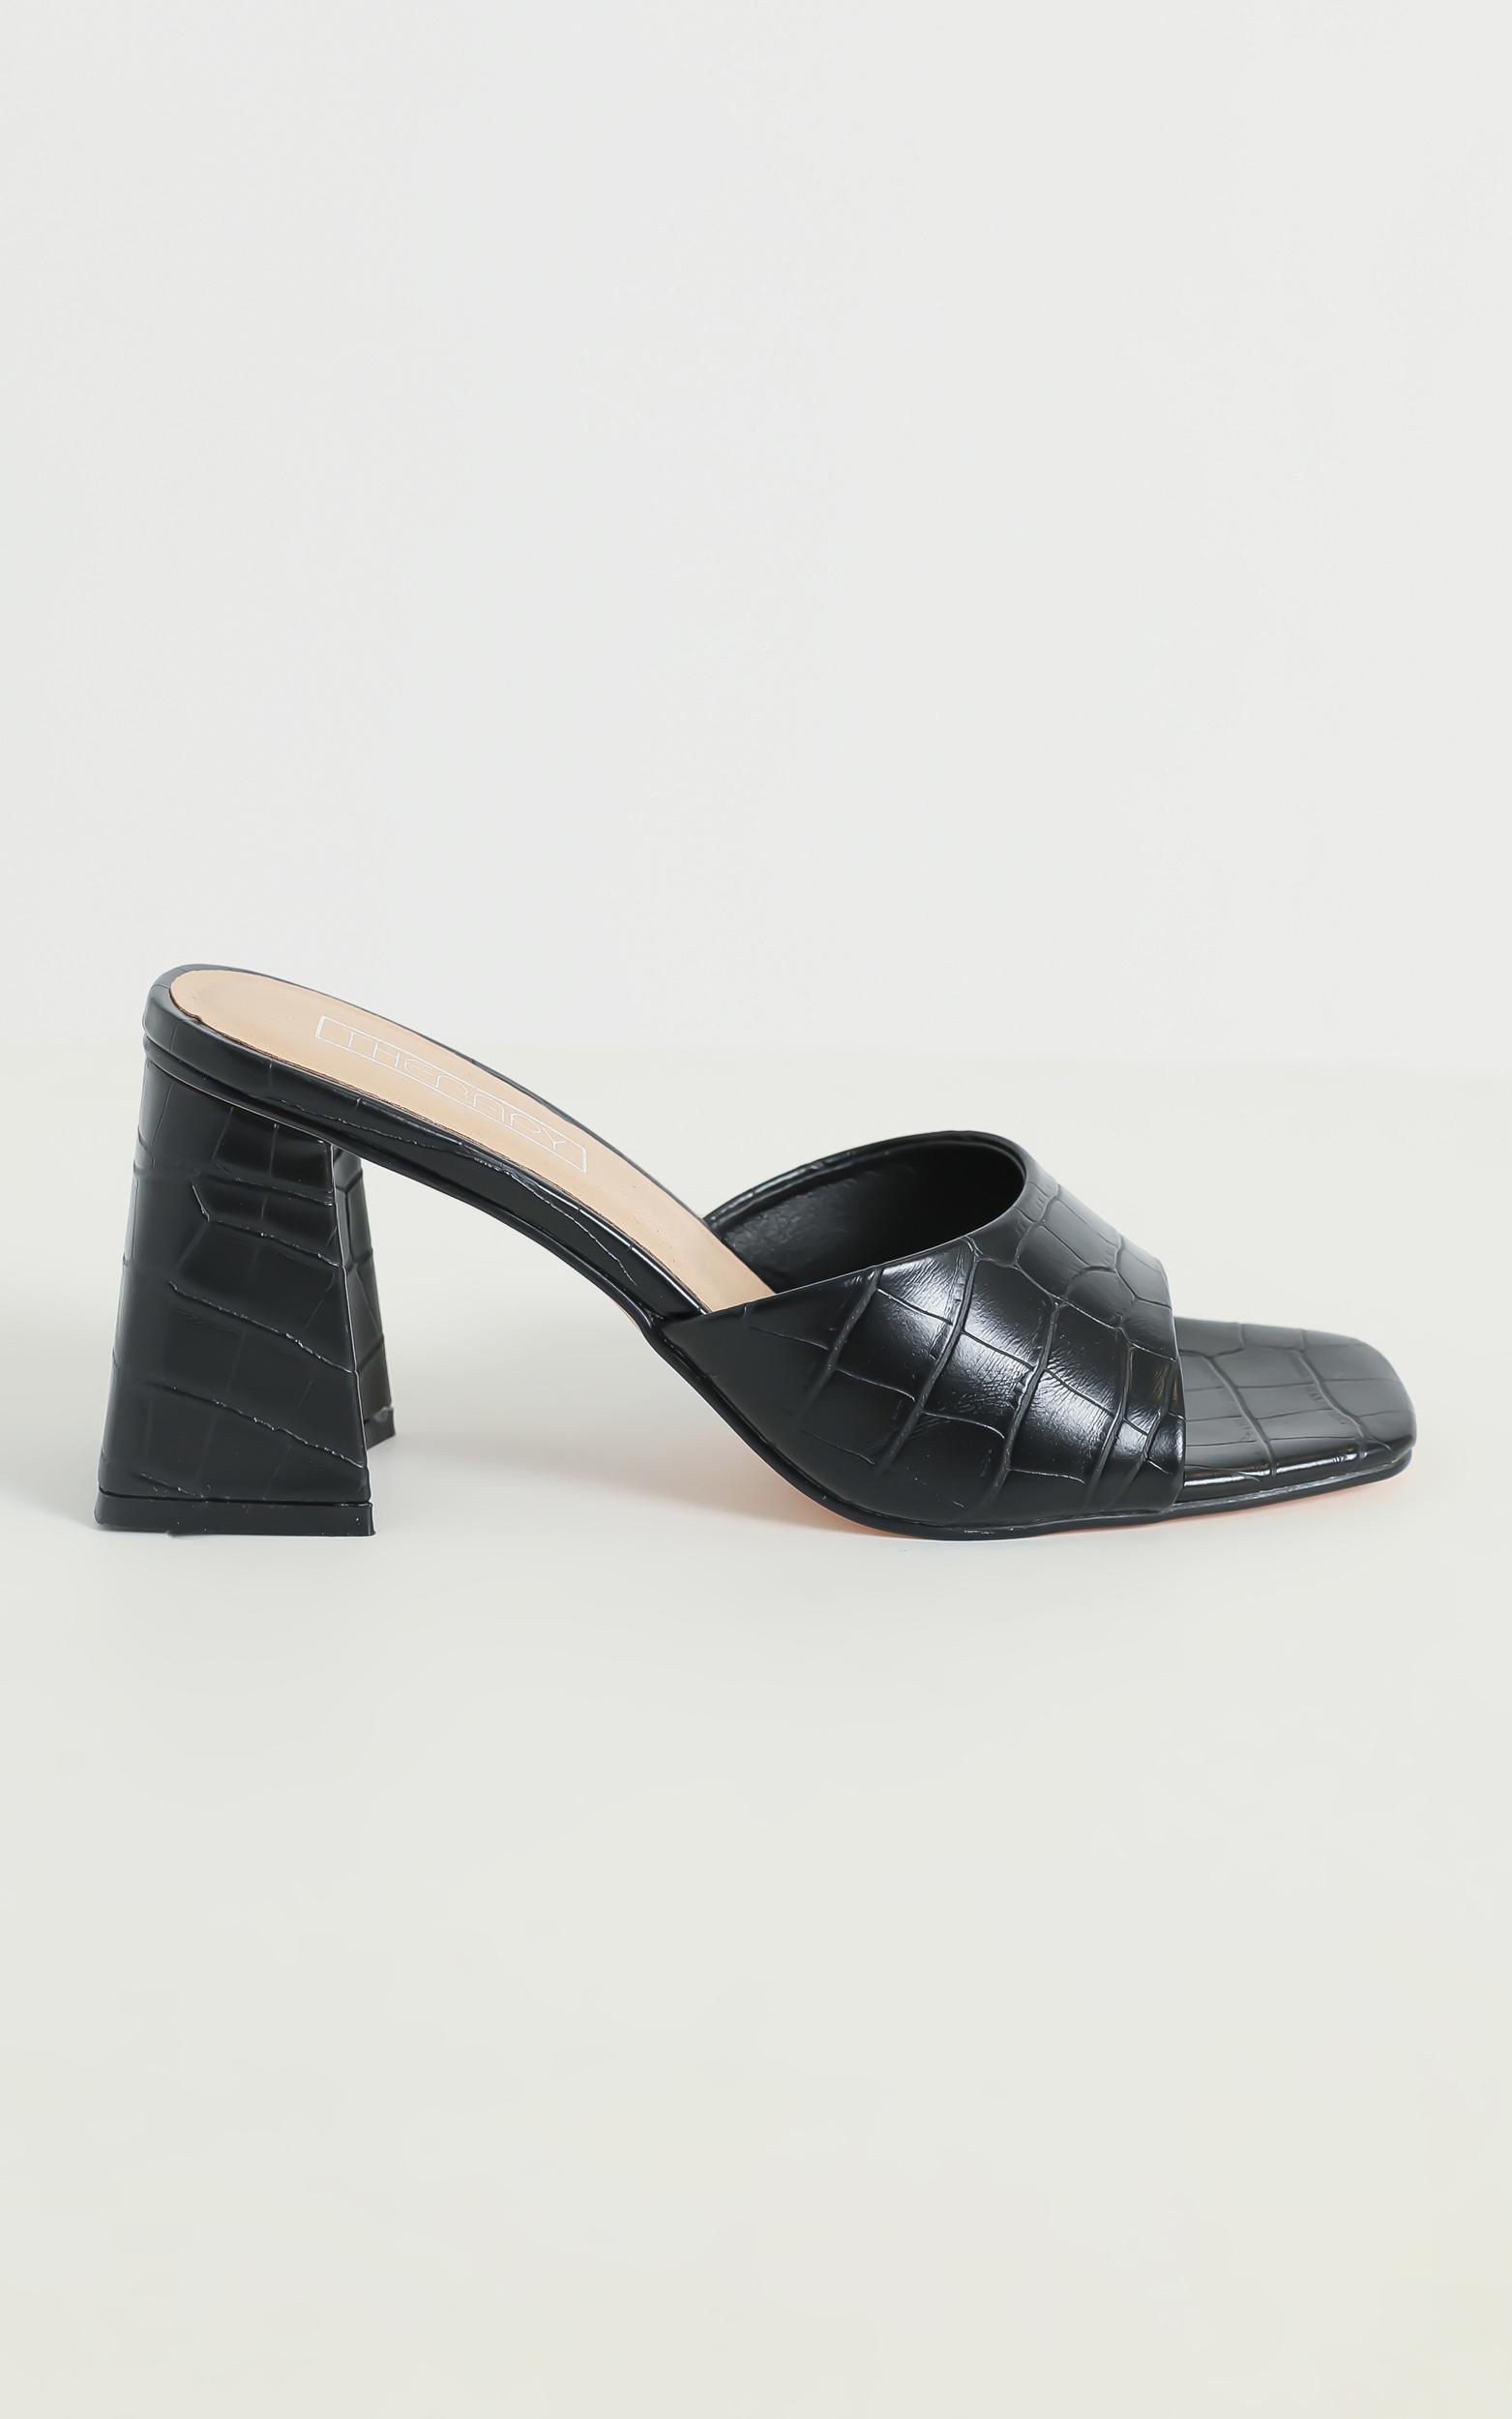 Therapy - Colina Heels in Black Croc - 05, BLK1, hi-res image number null